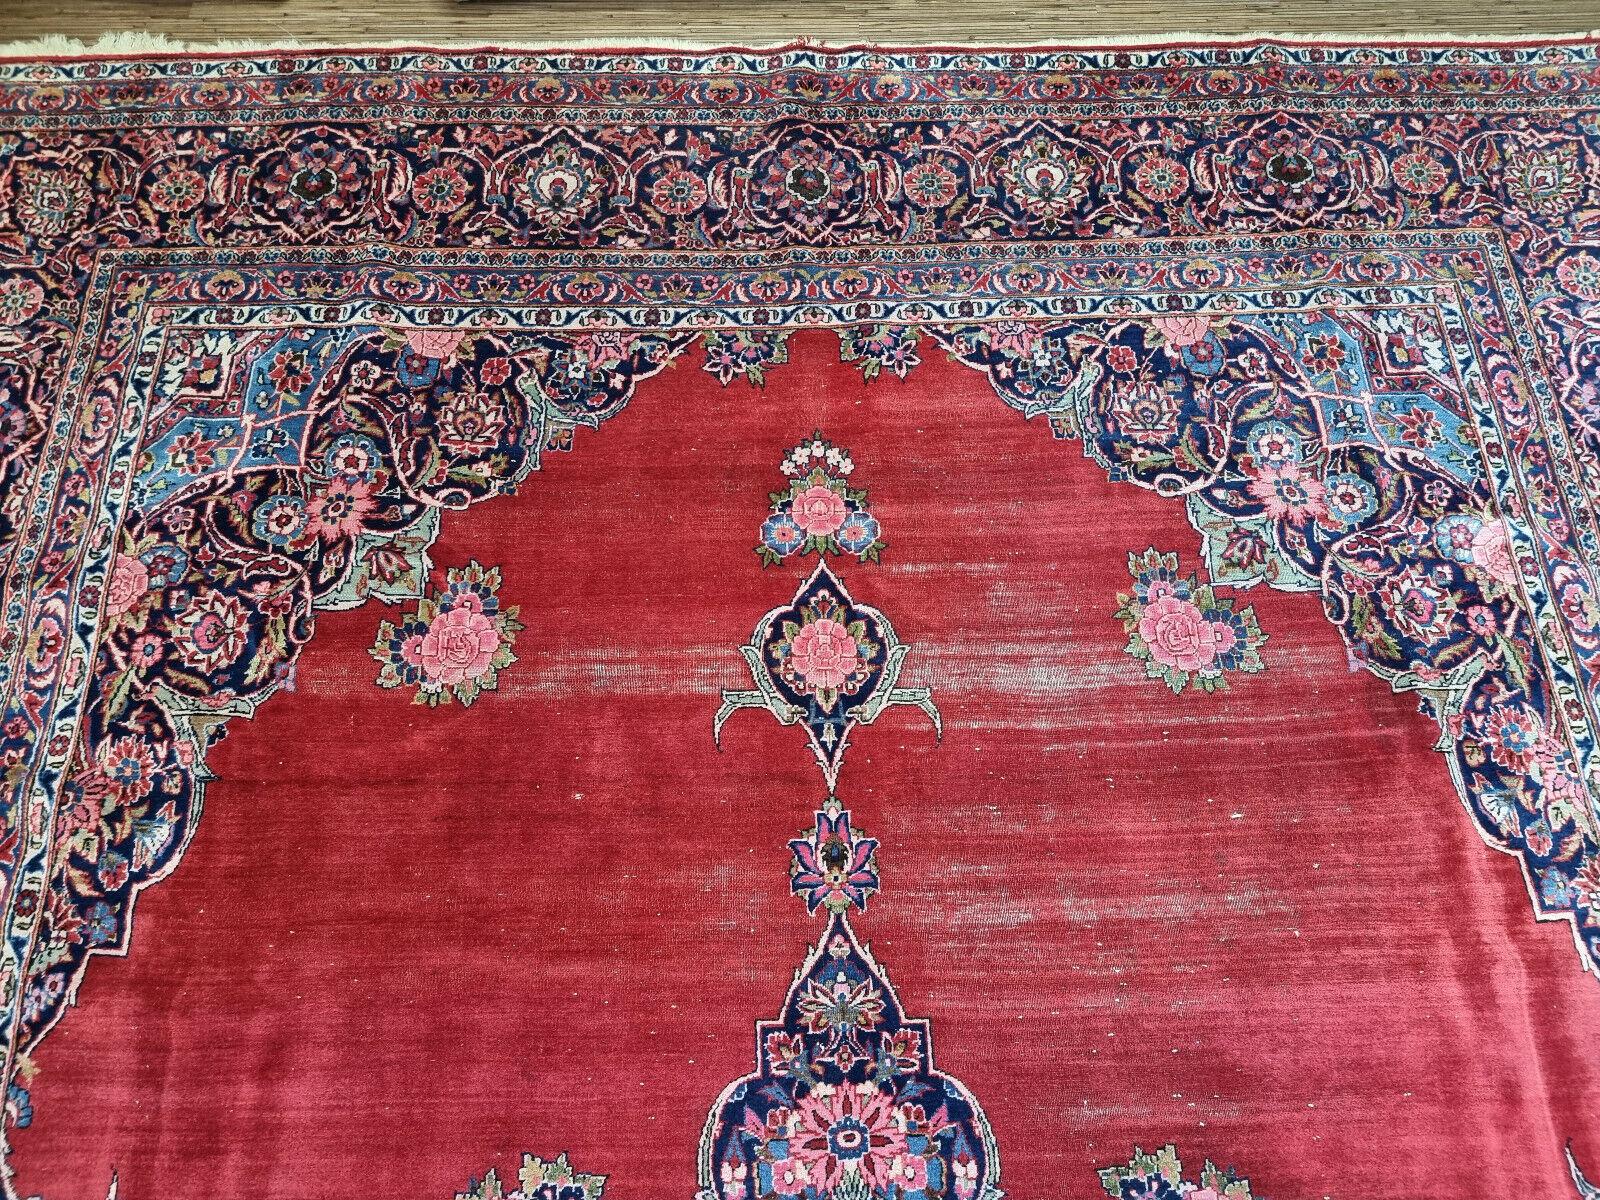 Wool Handmade Antique Persian Style Kashan Distressed Rug 8.5' x 12.9', 1920s - 1D68 For Sale